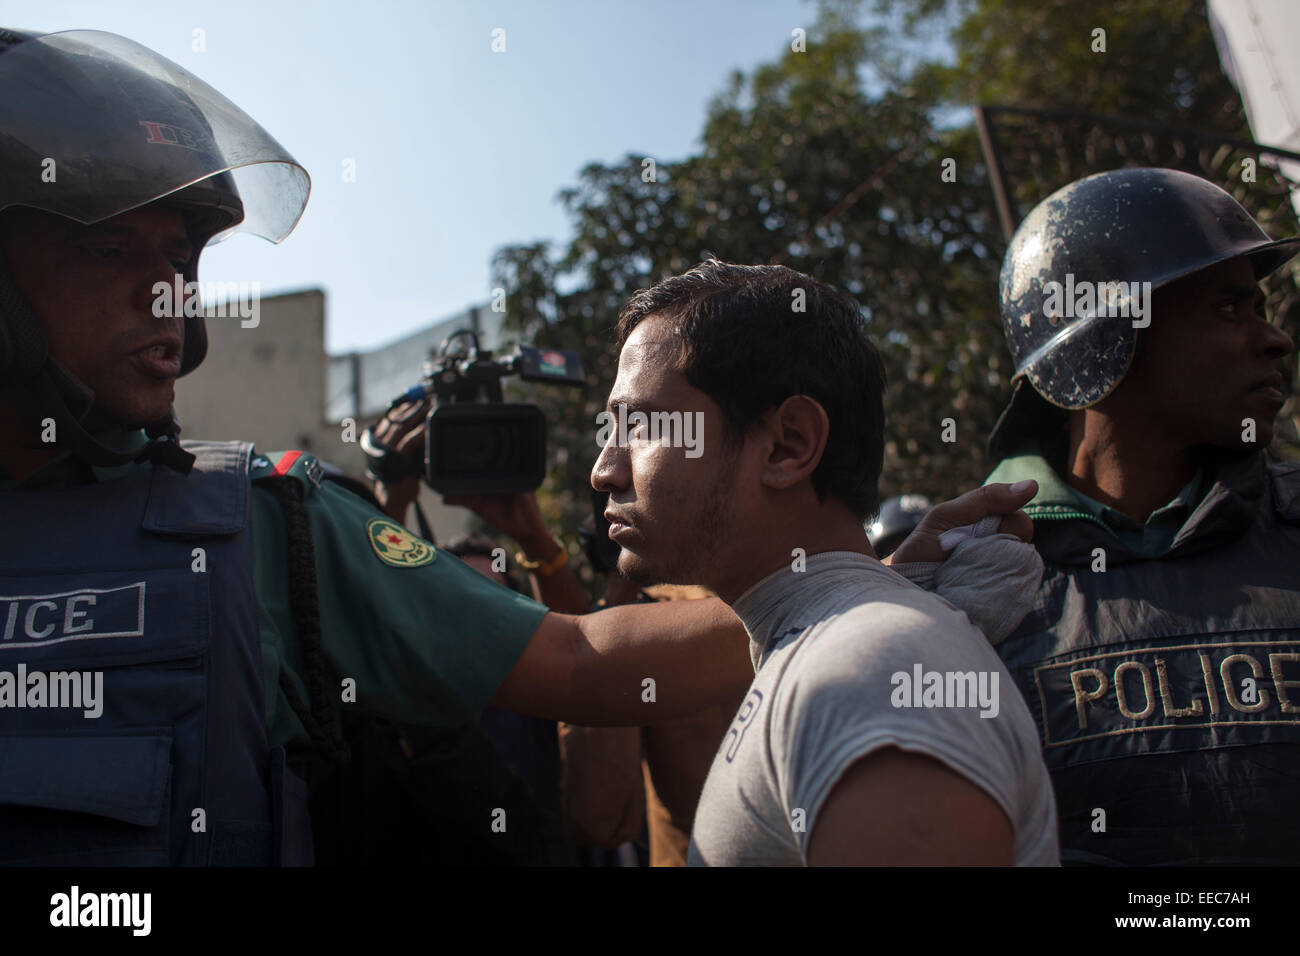 Bangladeshi policemen detain an activist of an Islamic political group during a protest in front of Baitul mokarram mosque in Dhaka. The protest was against the Bangladeshi Prime Minister Sheikh Hasina and former Telecommunication Minister Abdul Latif Siddique after his alleged anti-Islam comments at a rally. Stock Photo